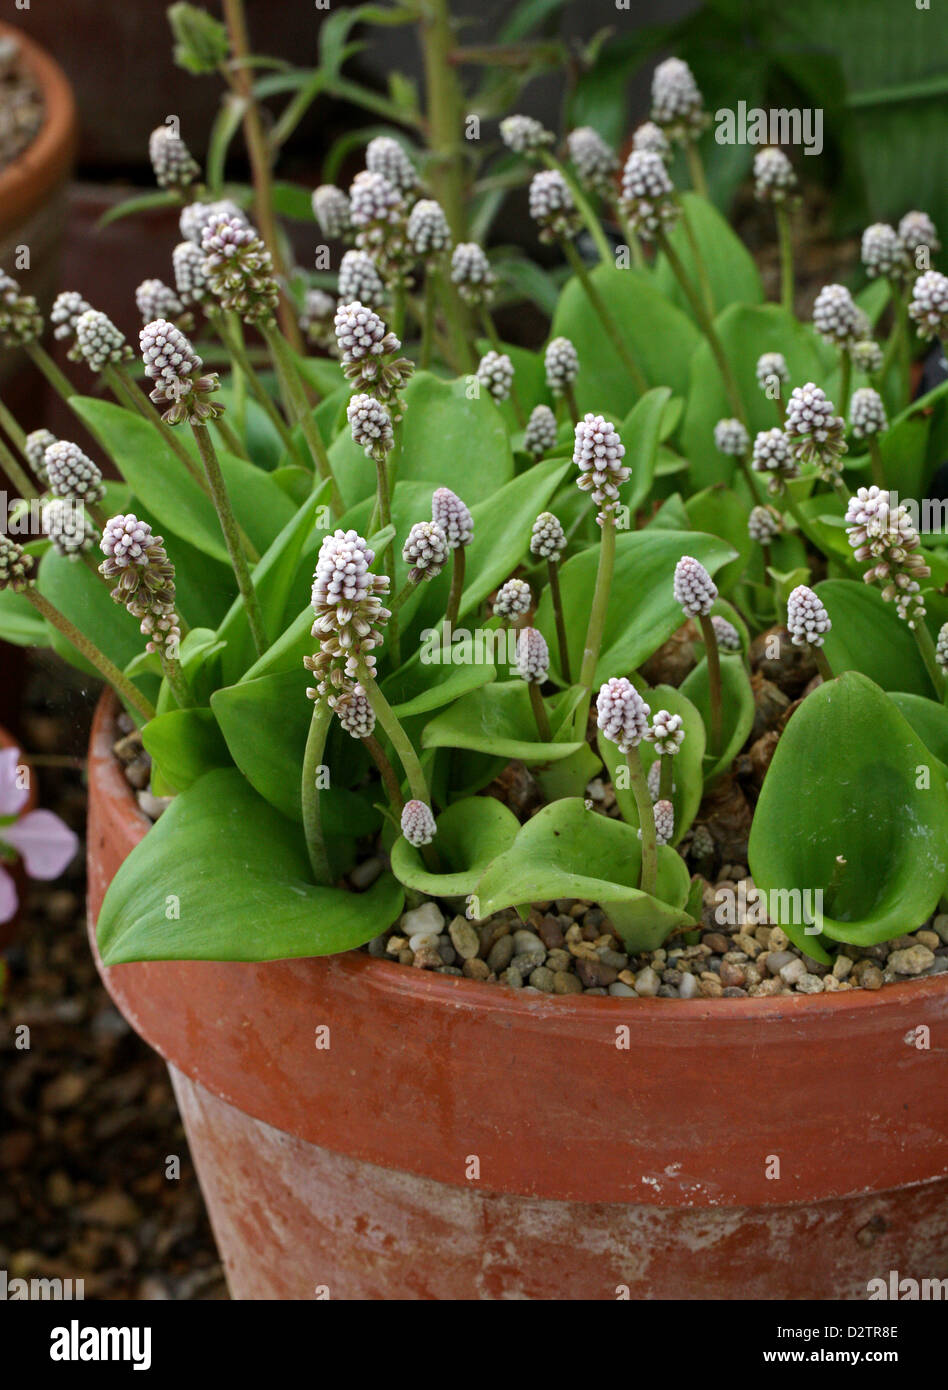 Little White Soldiers, Drimiopsis maculata, Asparagaceae (Hyacinthaceae). South Africa. Stock Photo